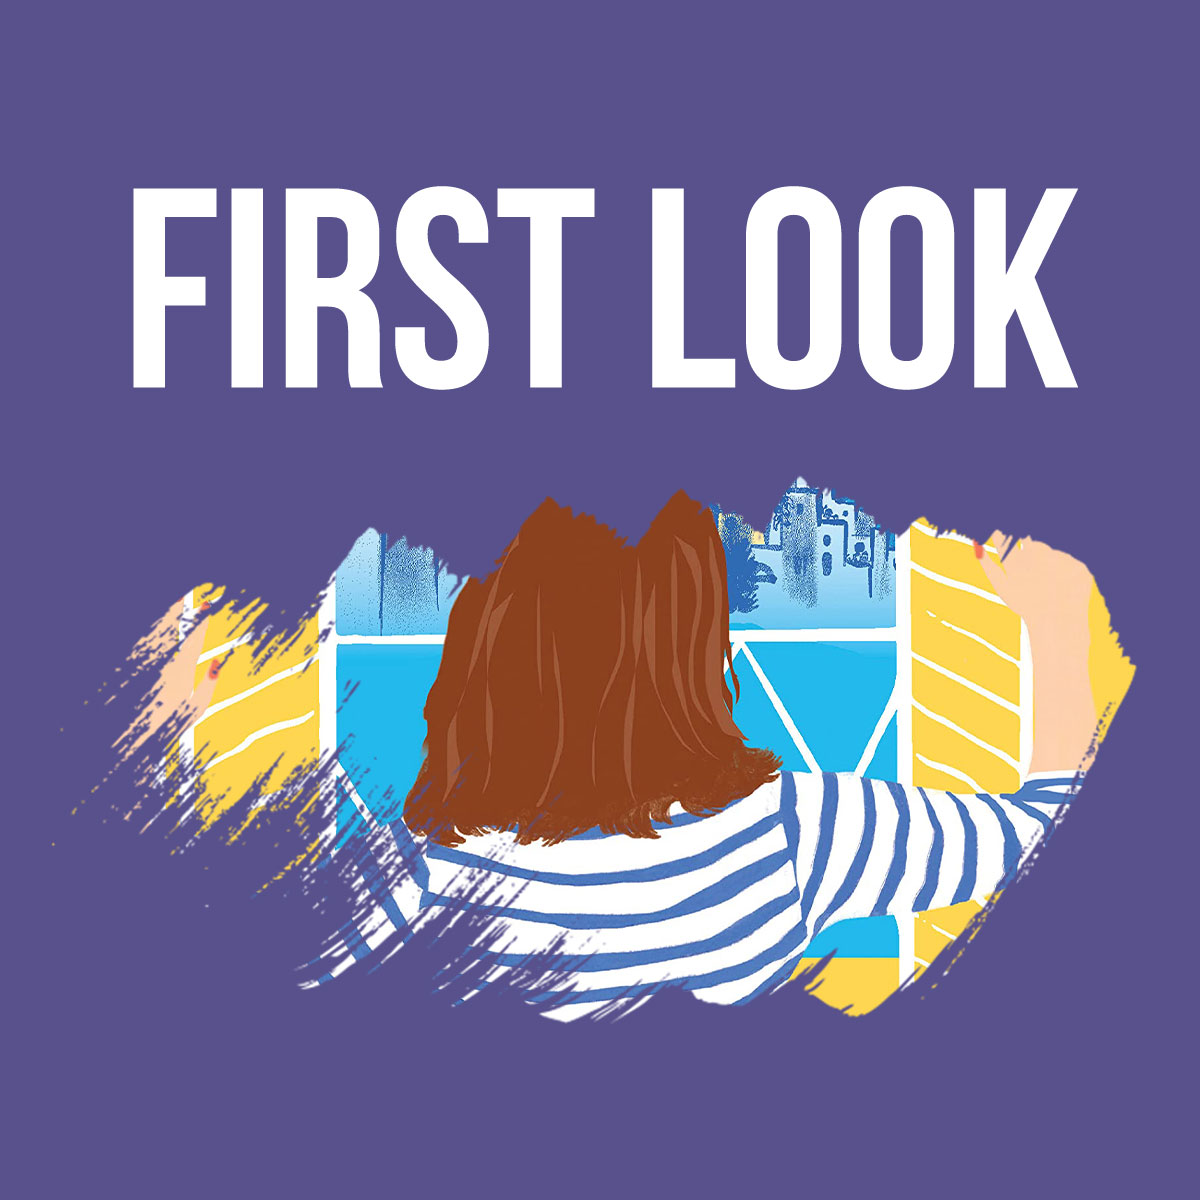 First Look The Second Chance Hotel by Sierra Godfrey